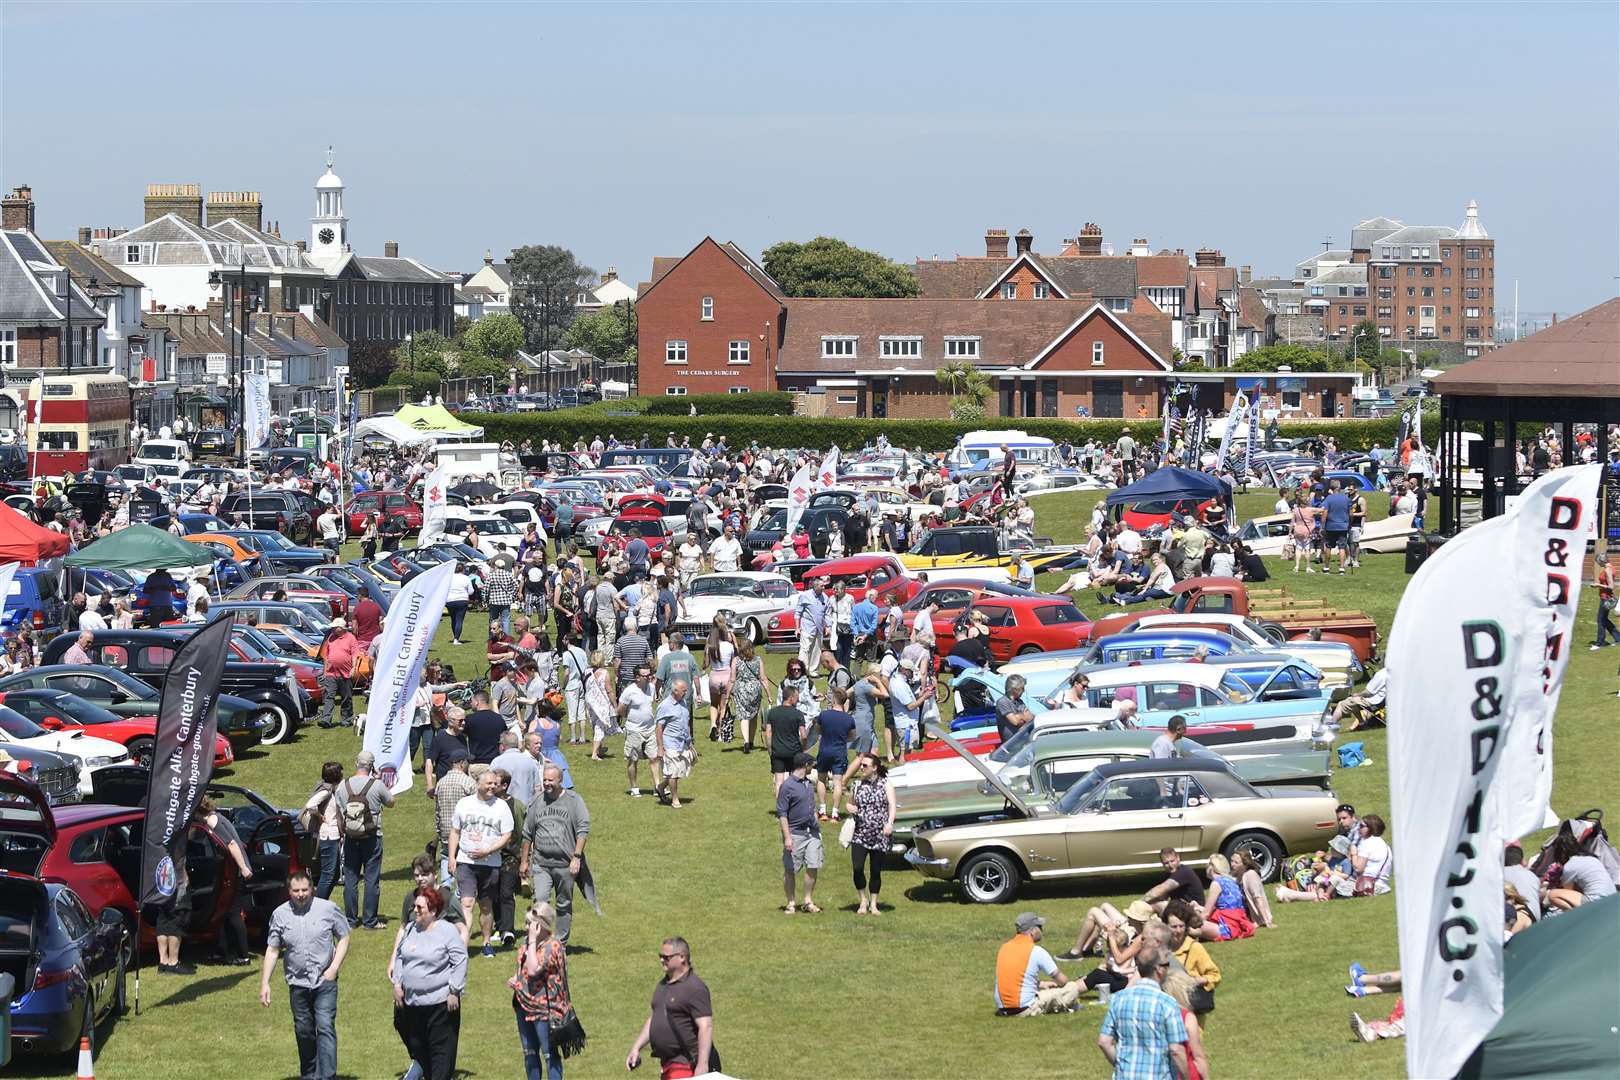 Thousands are expected to flock to Walmer Green for this year's Classic Motor Show